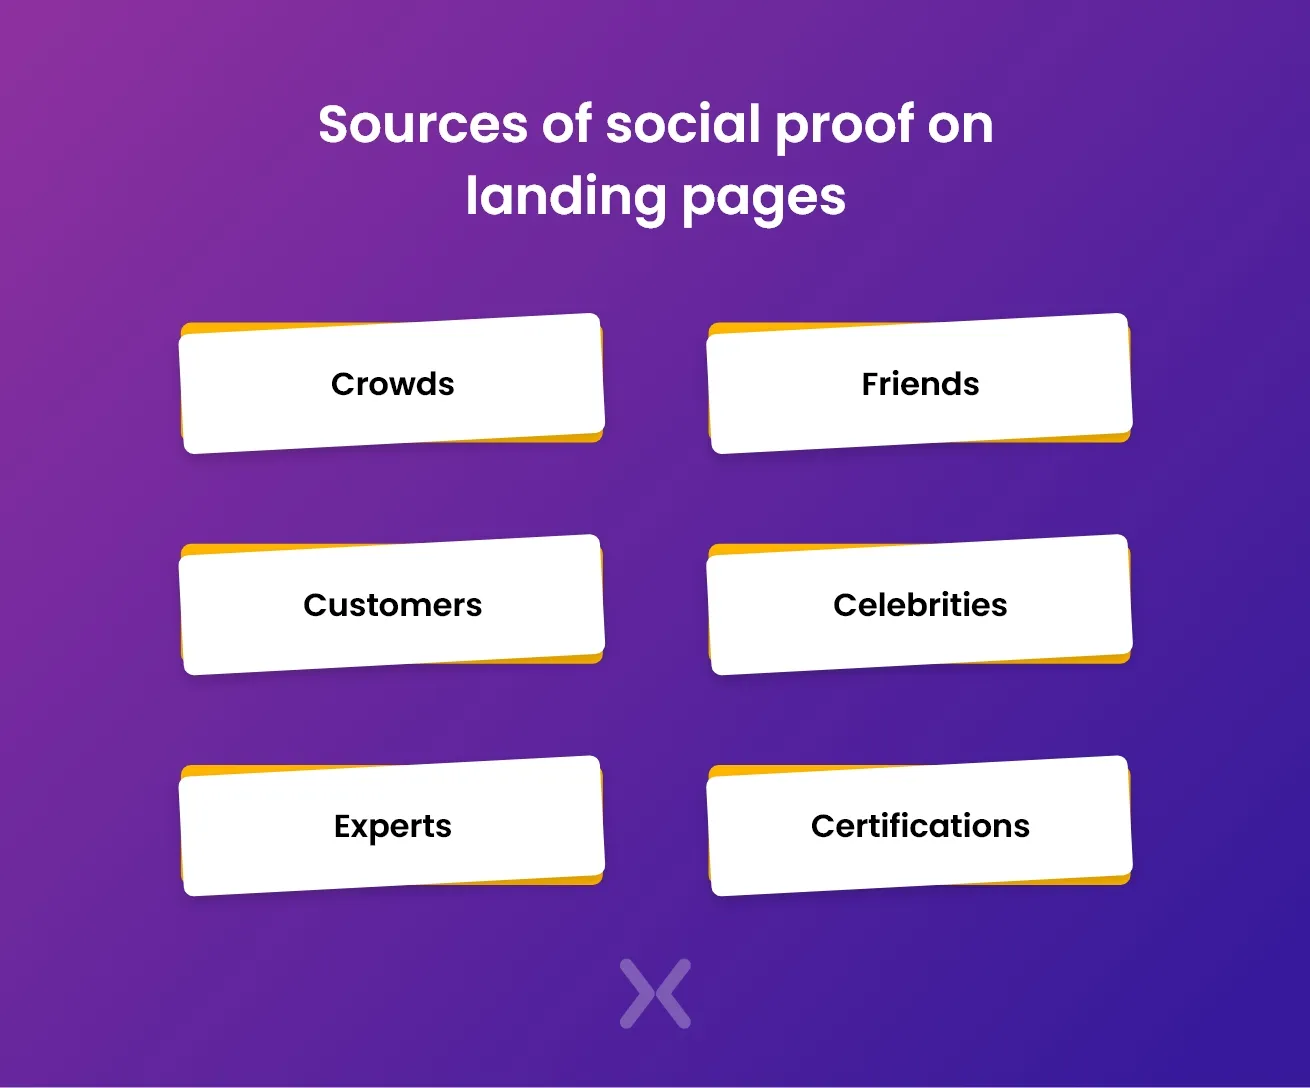 ways-to-increase-landing-page-social-proof-for-more-conversions-2.webp